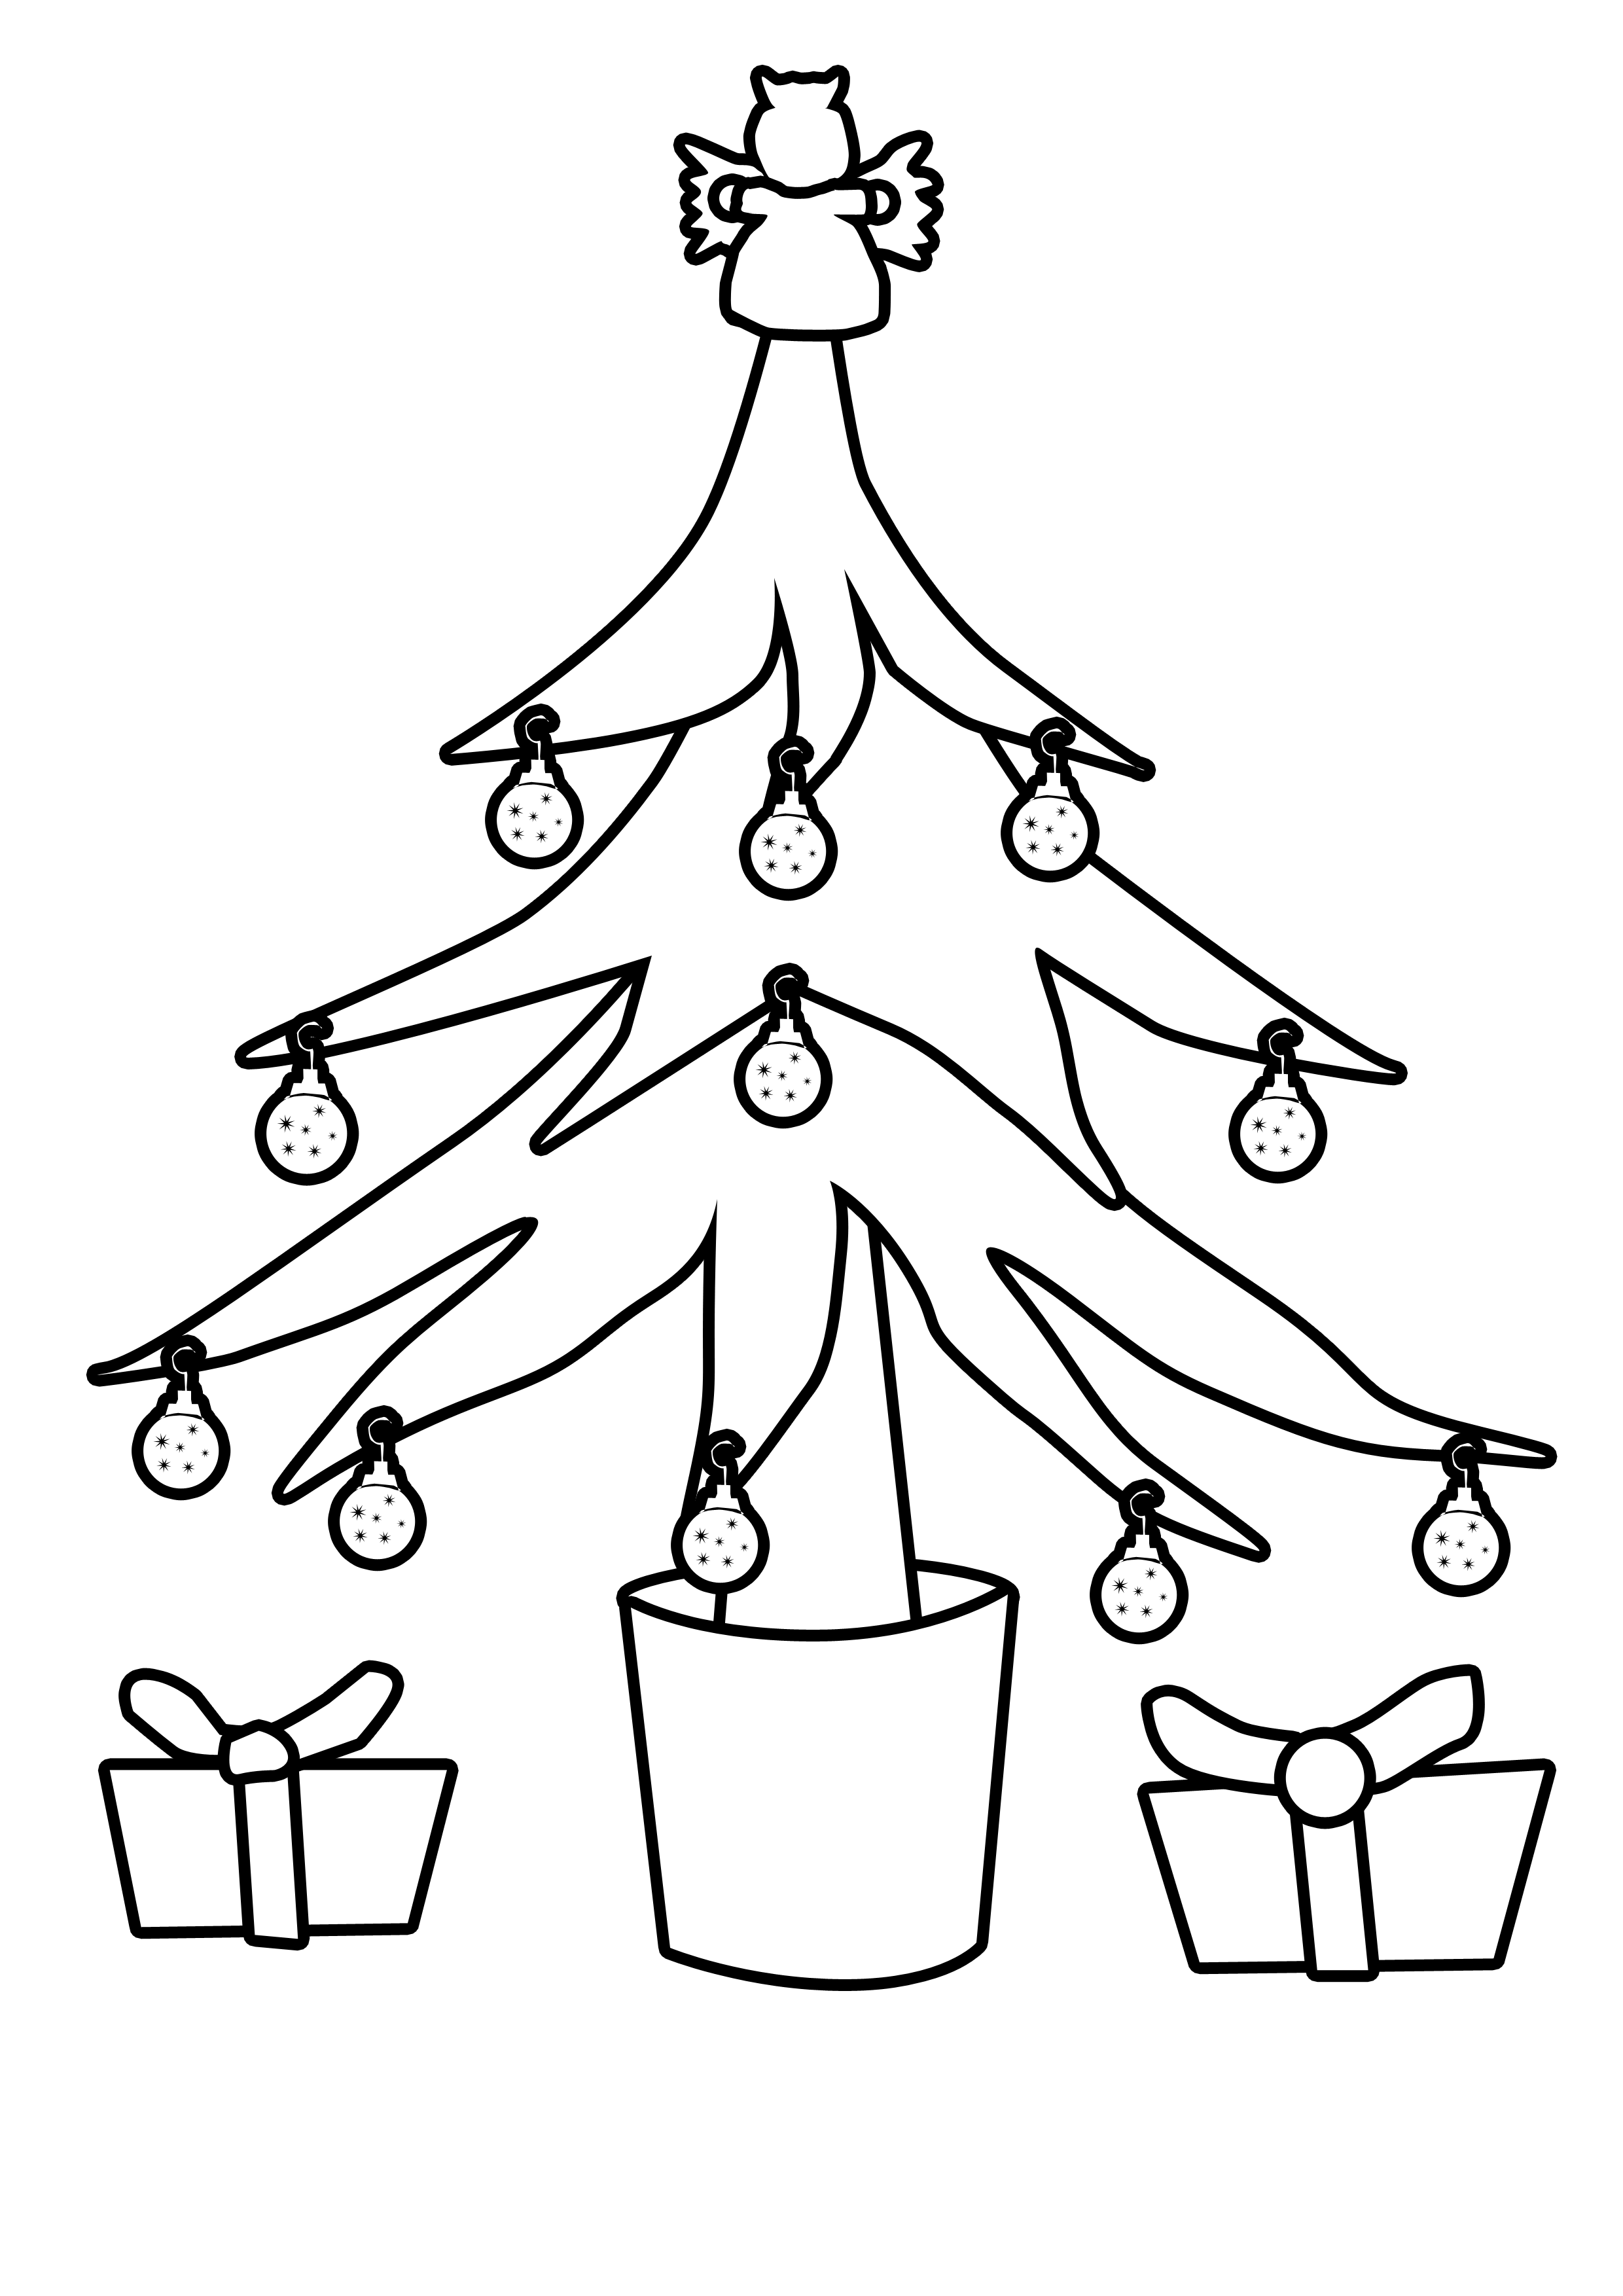 Christmas Tree Outline   Clipart Best